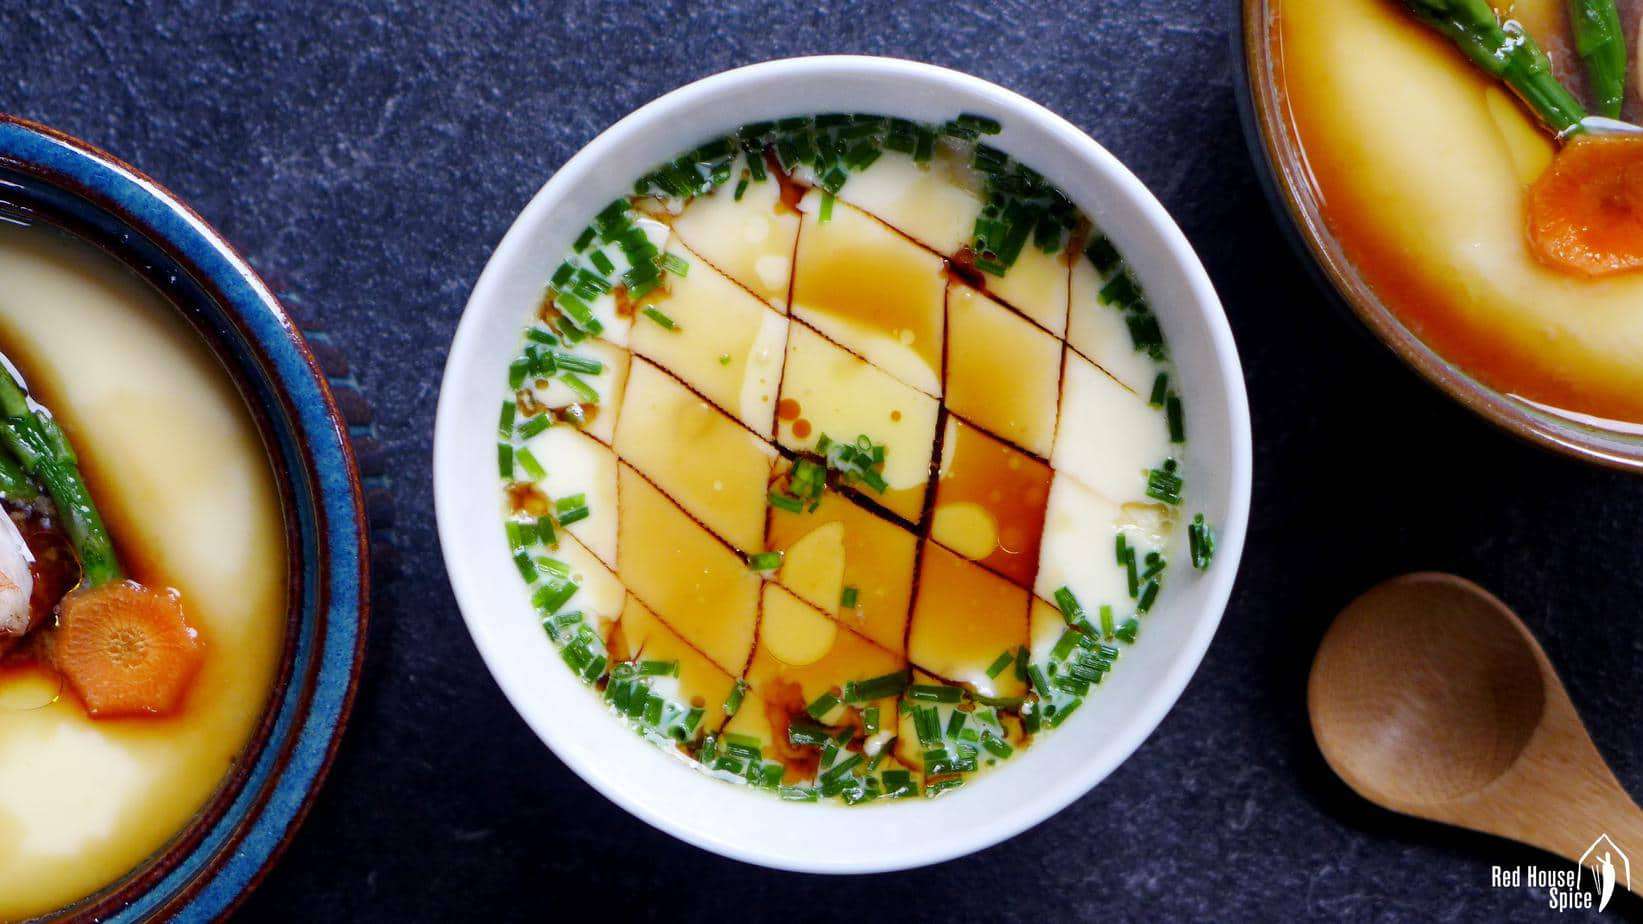 You only need soy sauce and sesame oil to season Chinese steamed eggs.